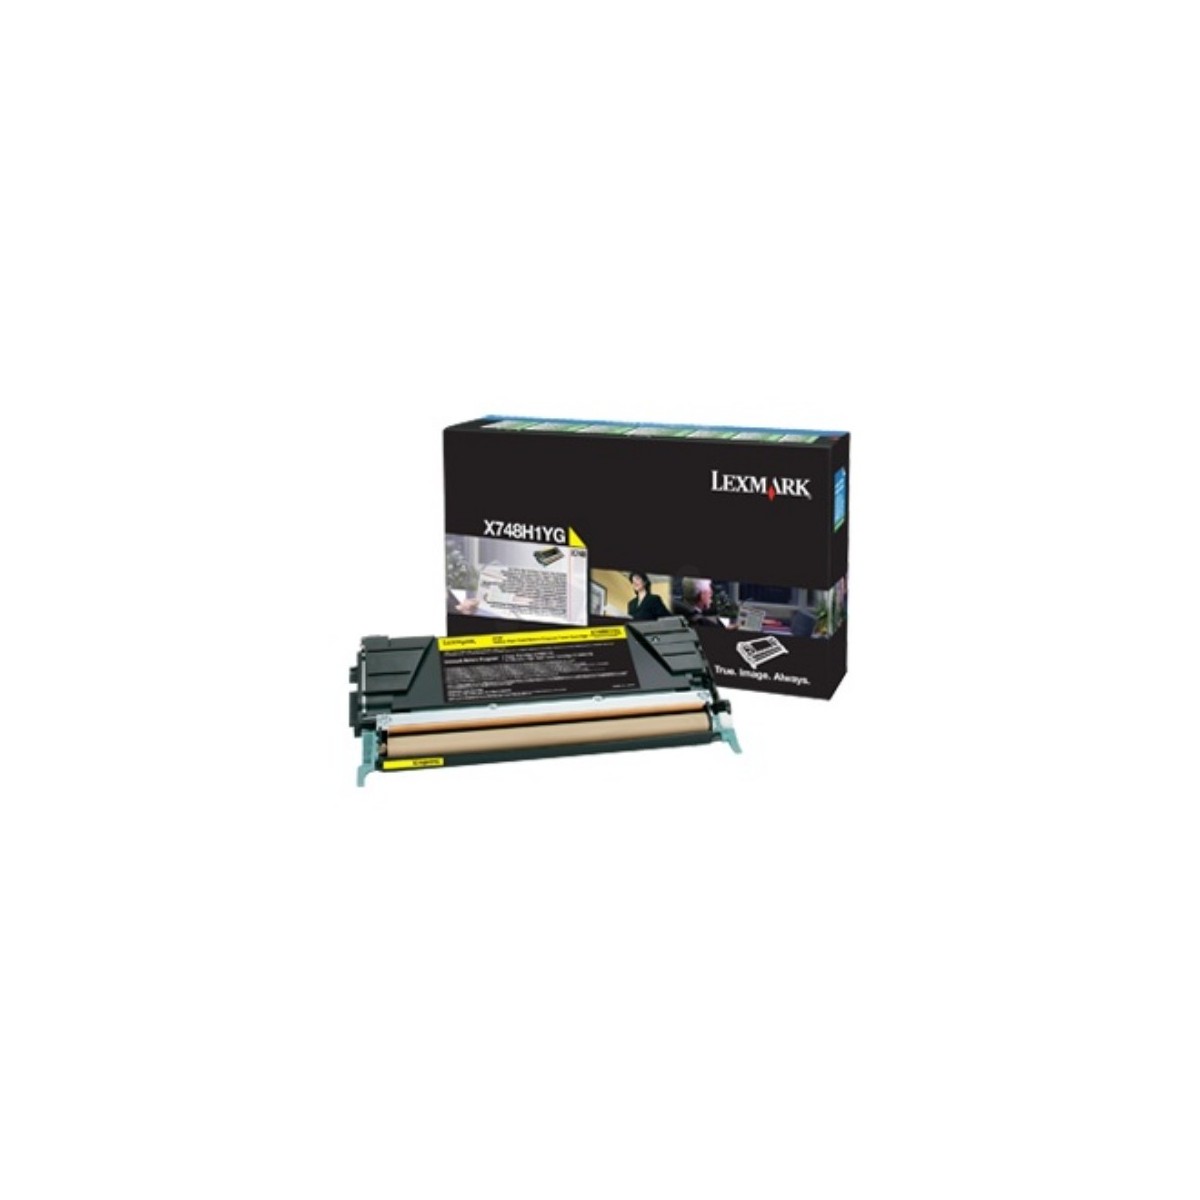 Lexmark X748H3YG - 10000 pages - Yellow - 1 pc(s)